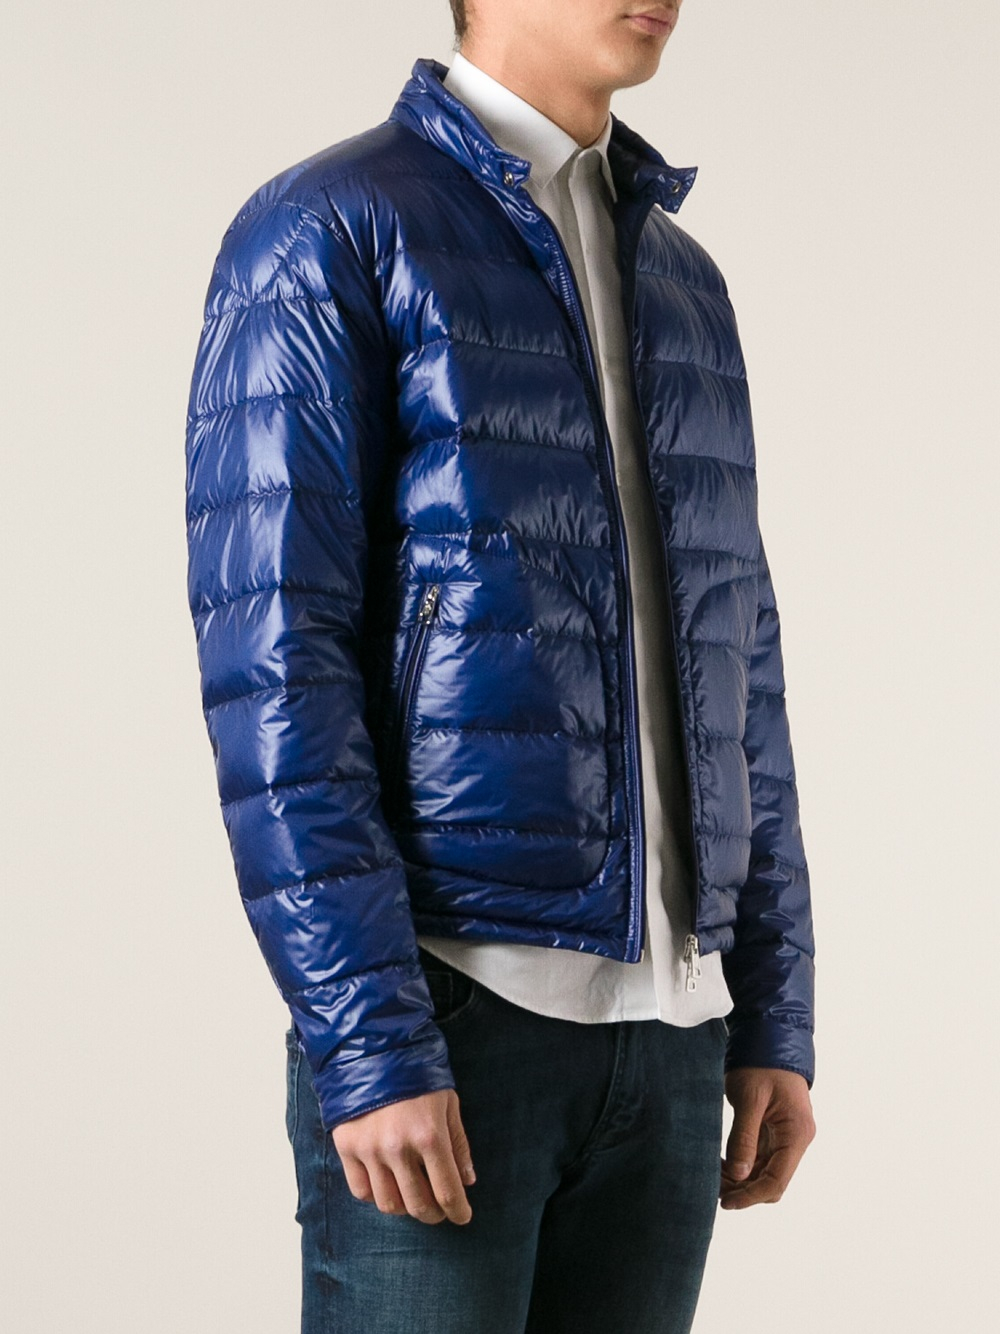 Lyst - Moncler Acorus Padded Jacket in Blue for Men